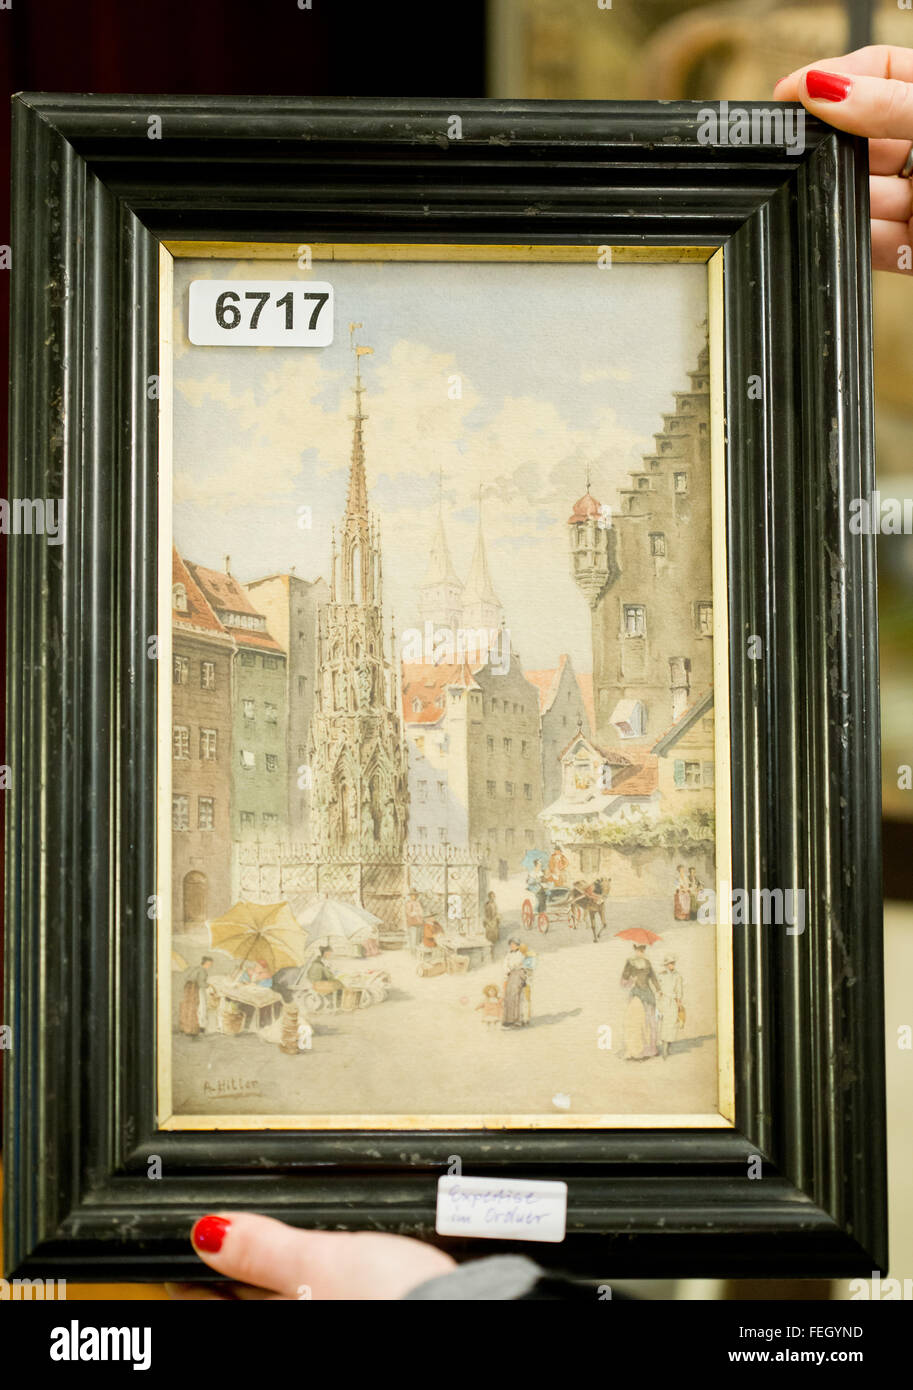 Nuremberg, Germany. 4th Feb, 2016. The water colour painting 'Nuernberg Schoener Brunnen', which is attributed to Adolf Hitler as author, is presented at an auctioneer in Nuremberg, Germany, 4 February 2016. A total of 29 paintings and drawings, attributed to Adolf Hitler, have been auctioned off at Weidler actioneers in Nuremberg on 6 February 2016. Photo: Daniel Karmann/dpa/Alamy Live News Stock Photo